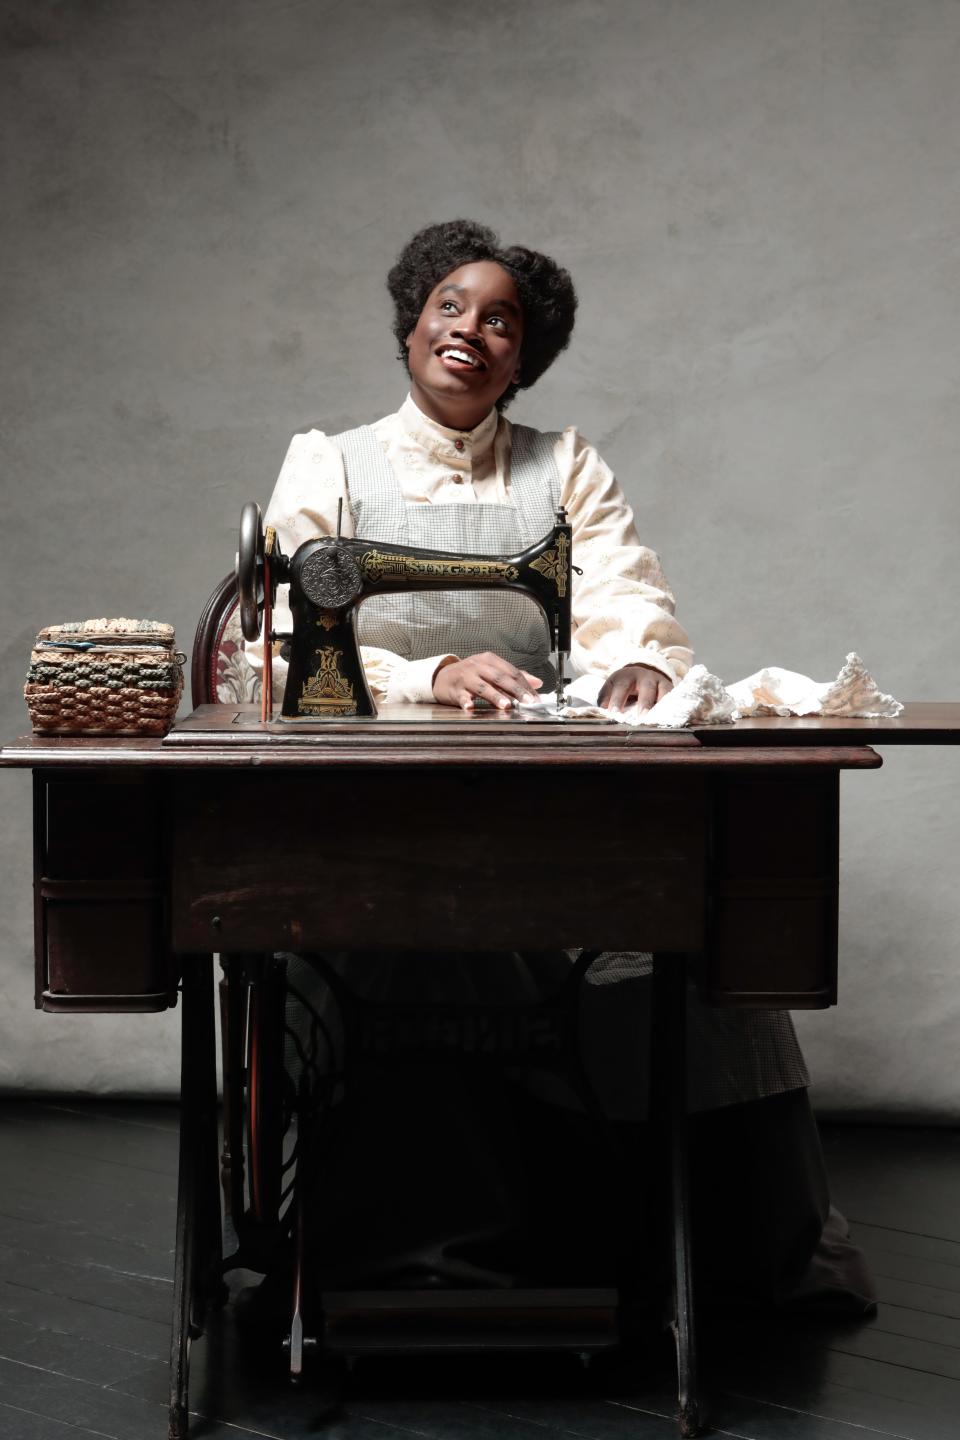 Aneisa J. Hicks stars as the seamstress Esther in Lynn Nottage’s play “Intimate Apparel” at Asolo Repertory Theatre.